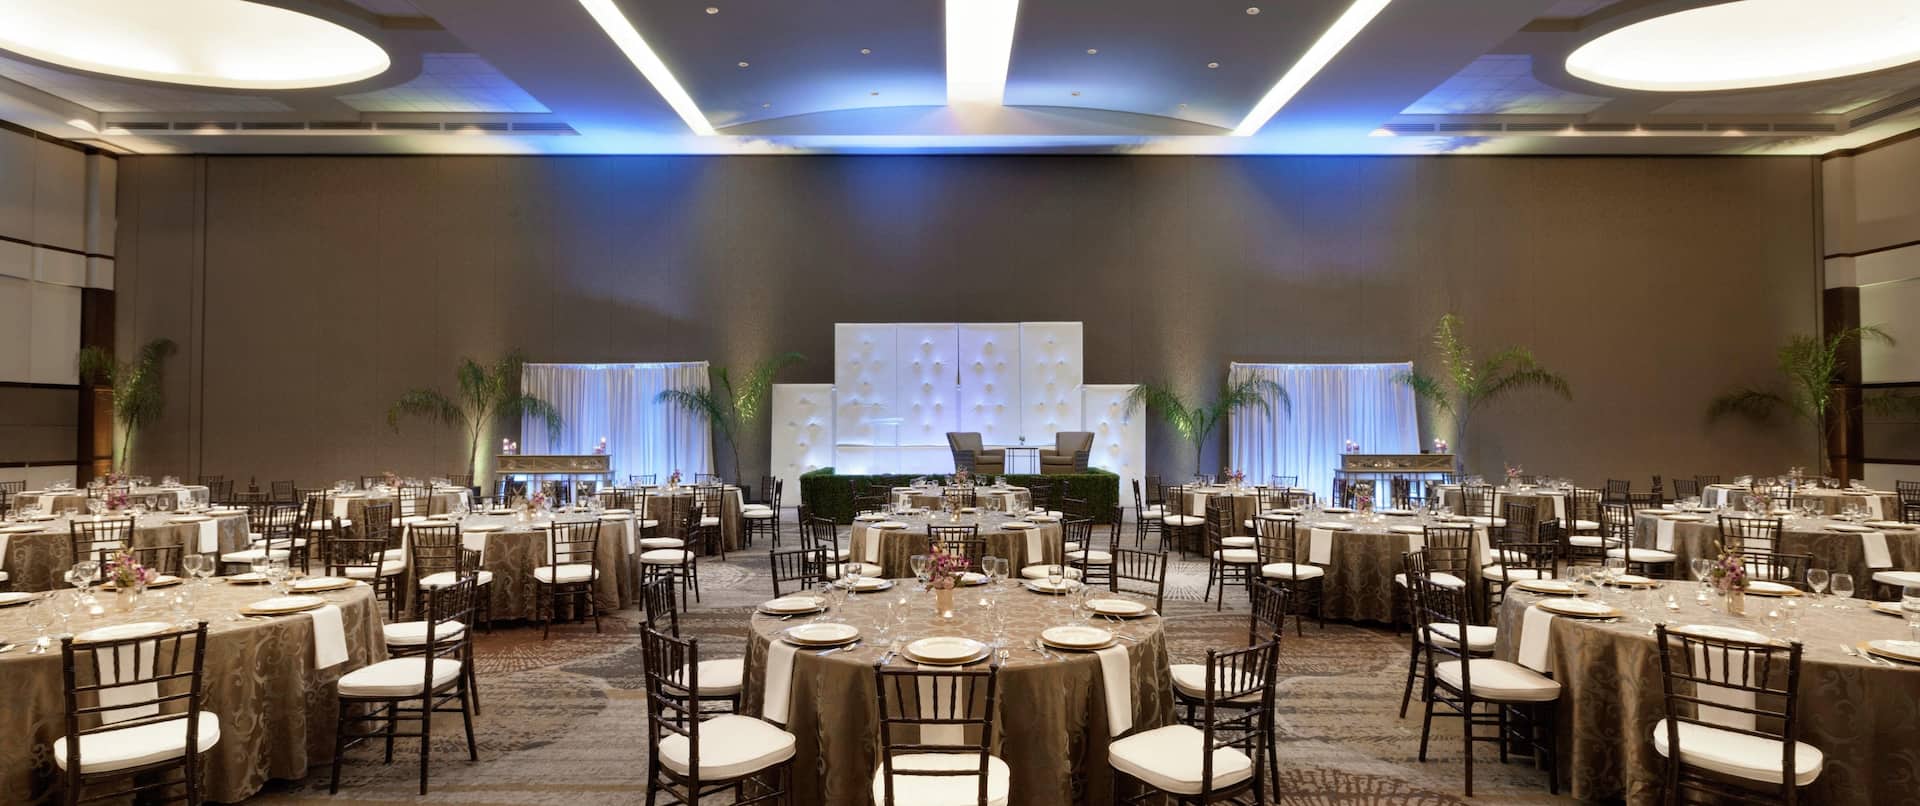 Event space set up in a ballroom style 